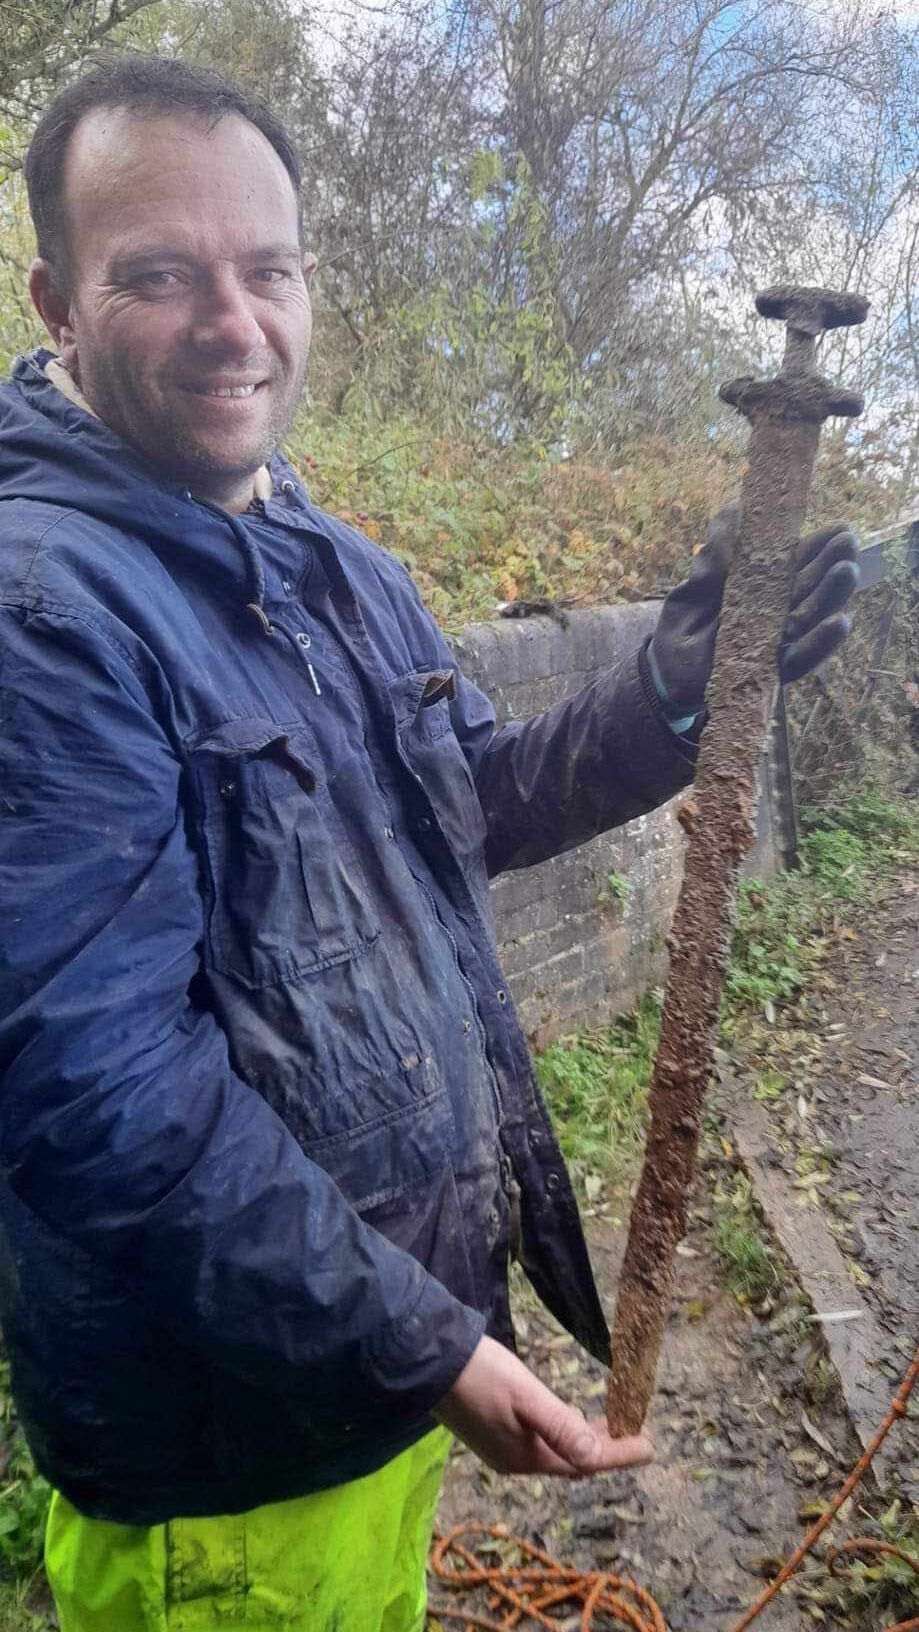 A fisherman catches an ancient Viking sword in Britain (photo)